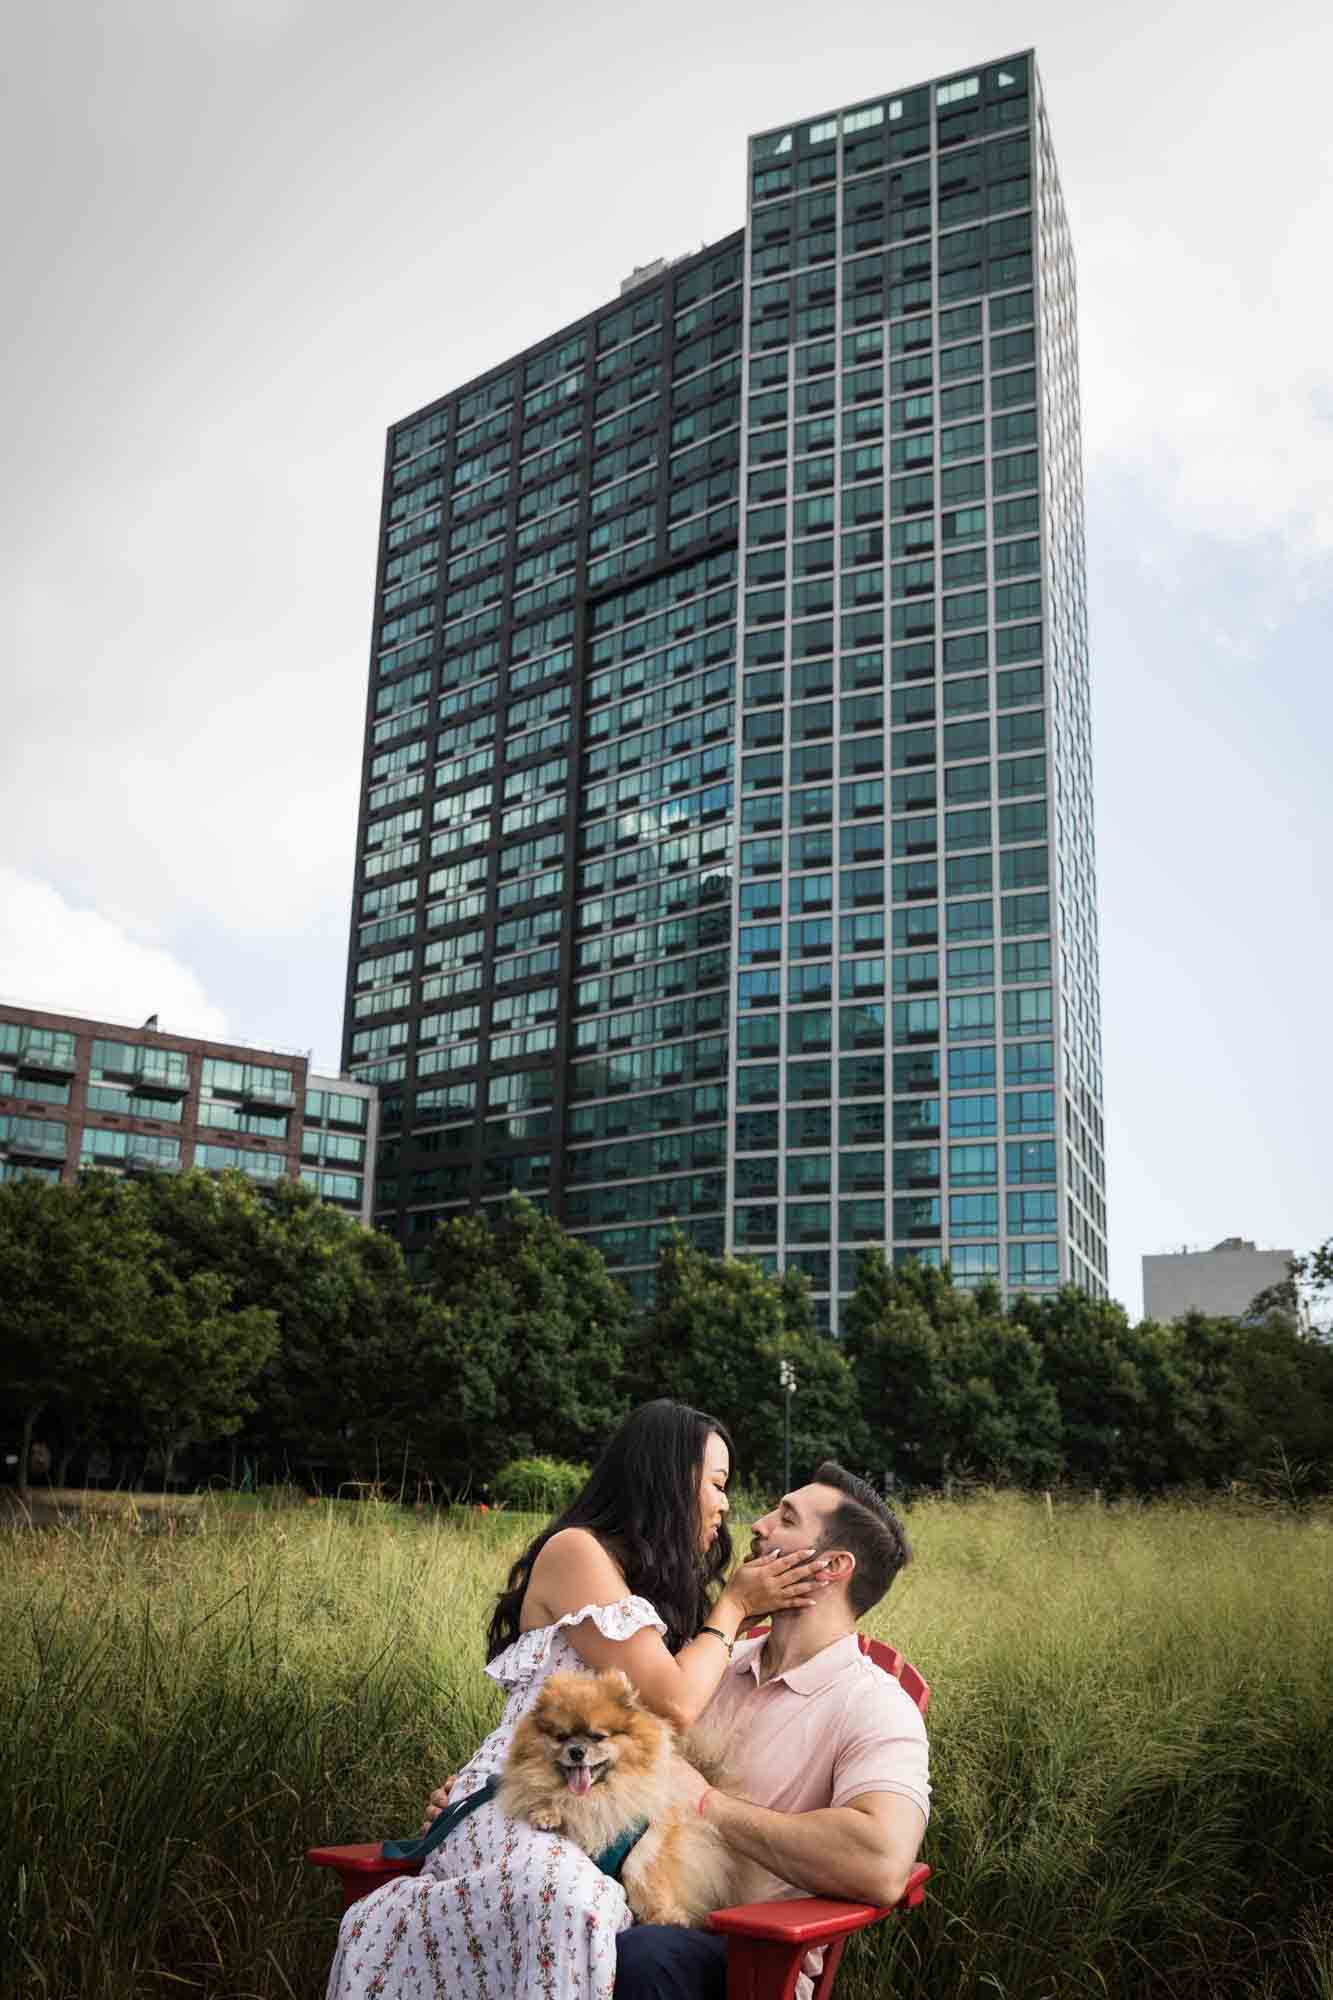 Couple sitting on red Adirondack chair kissing during a Gantry Plaza State Park engagement photo shoot